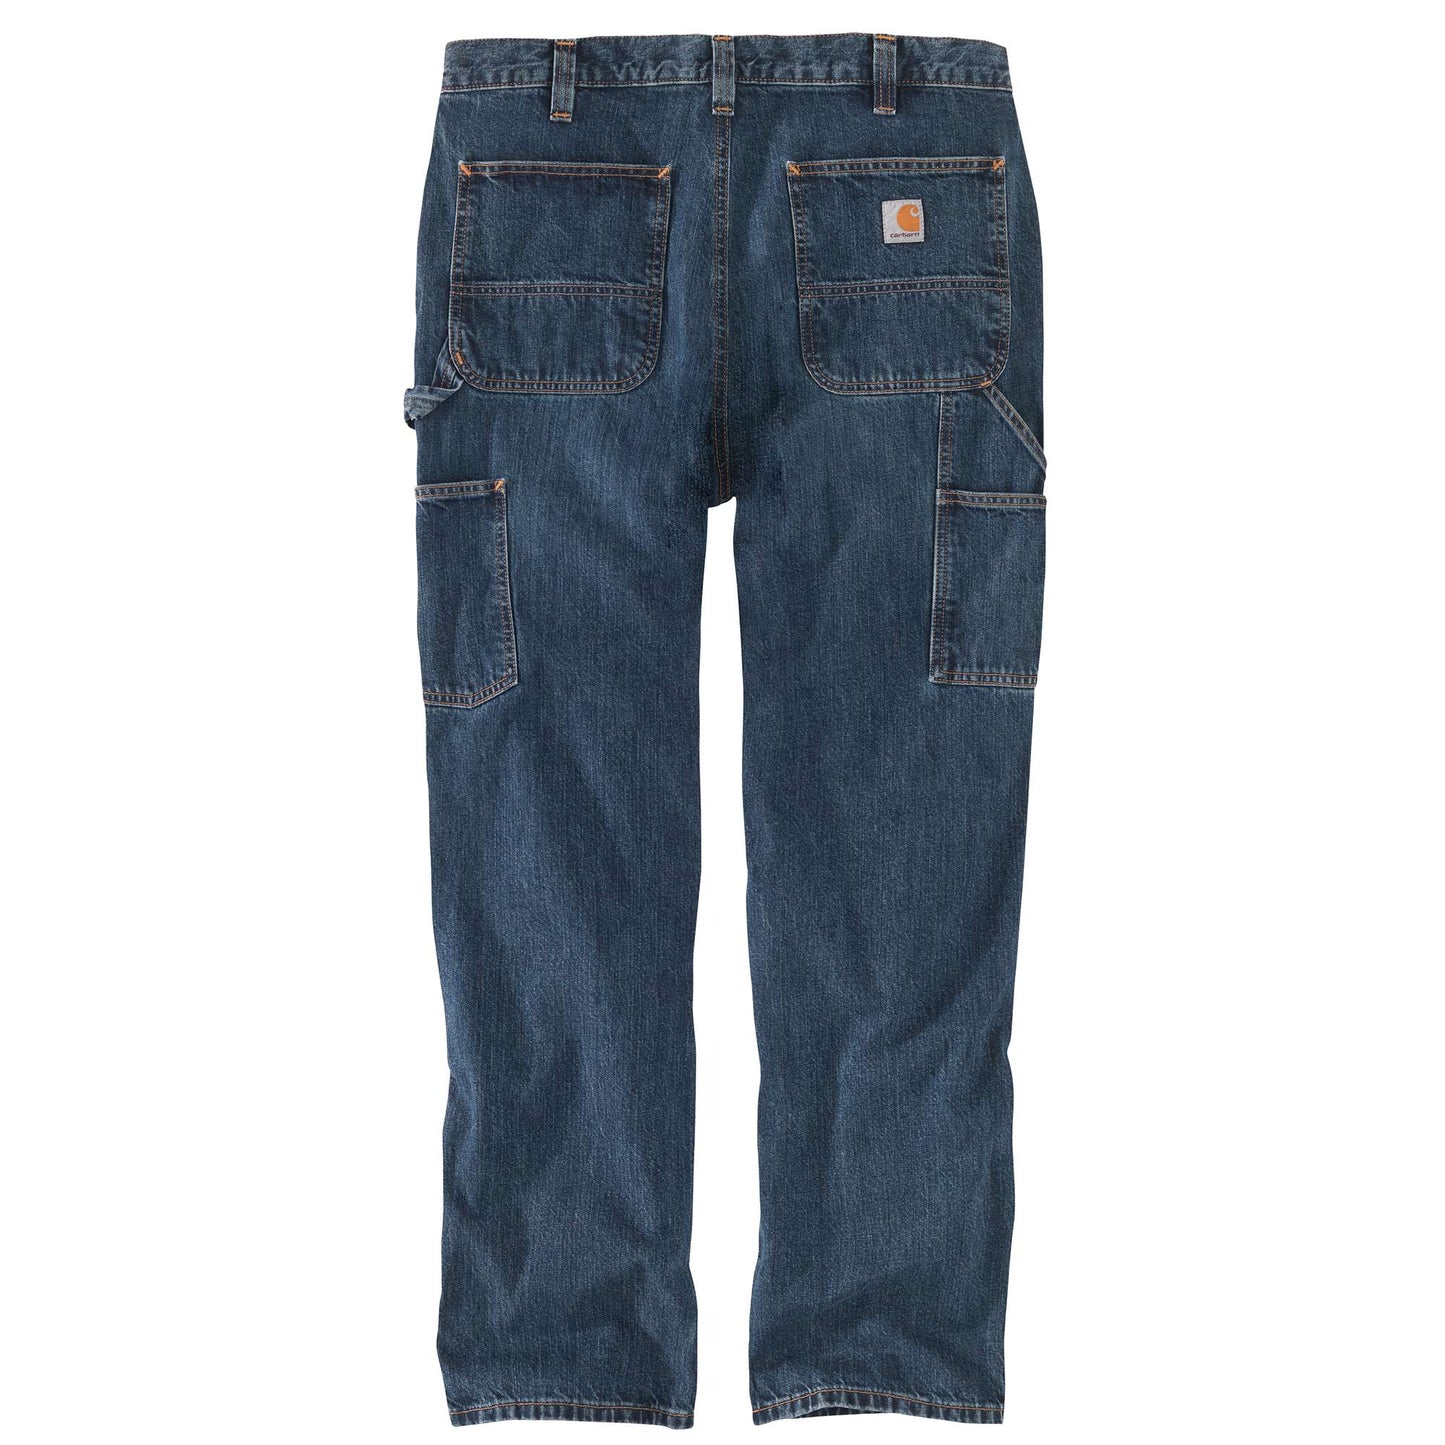 Loose Fit Utility Jean | Carhartt Reworked